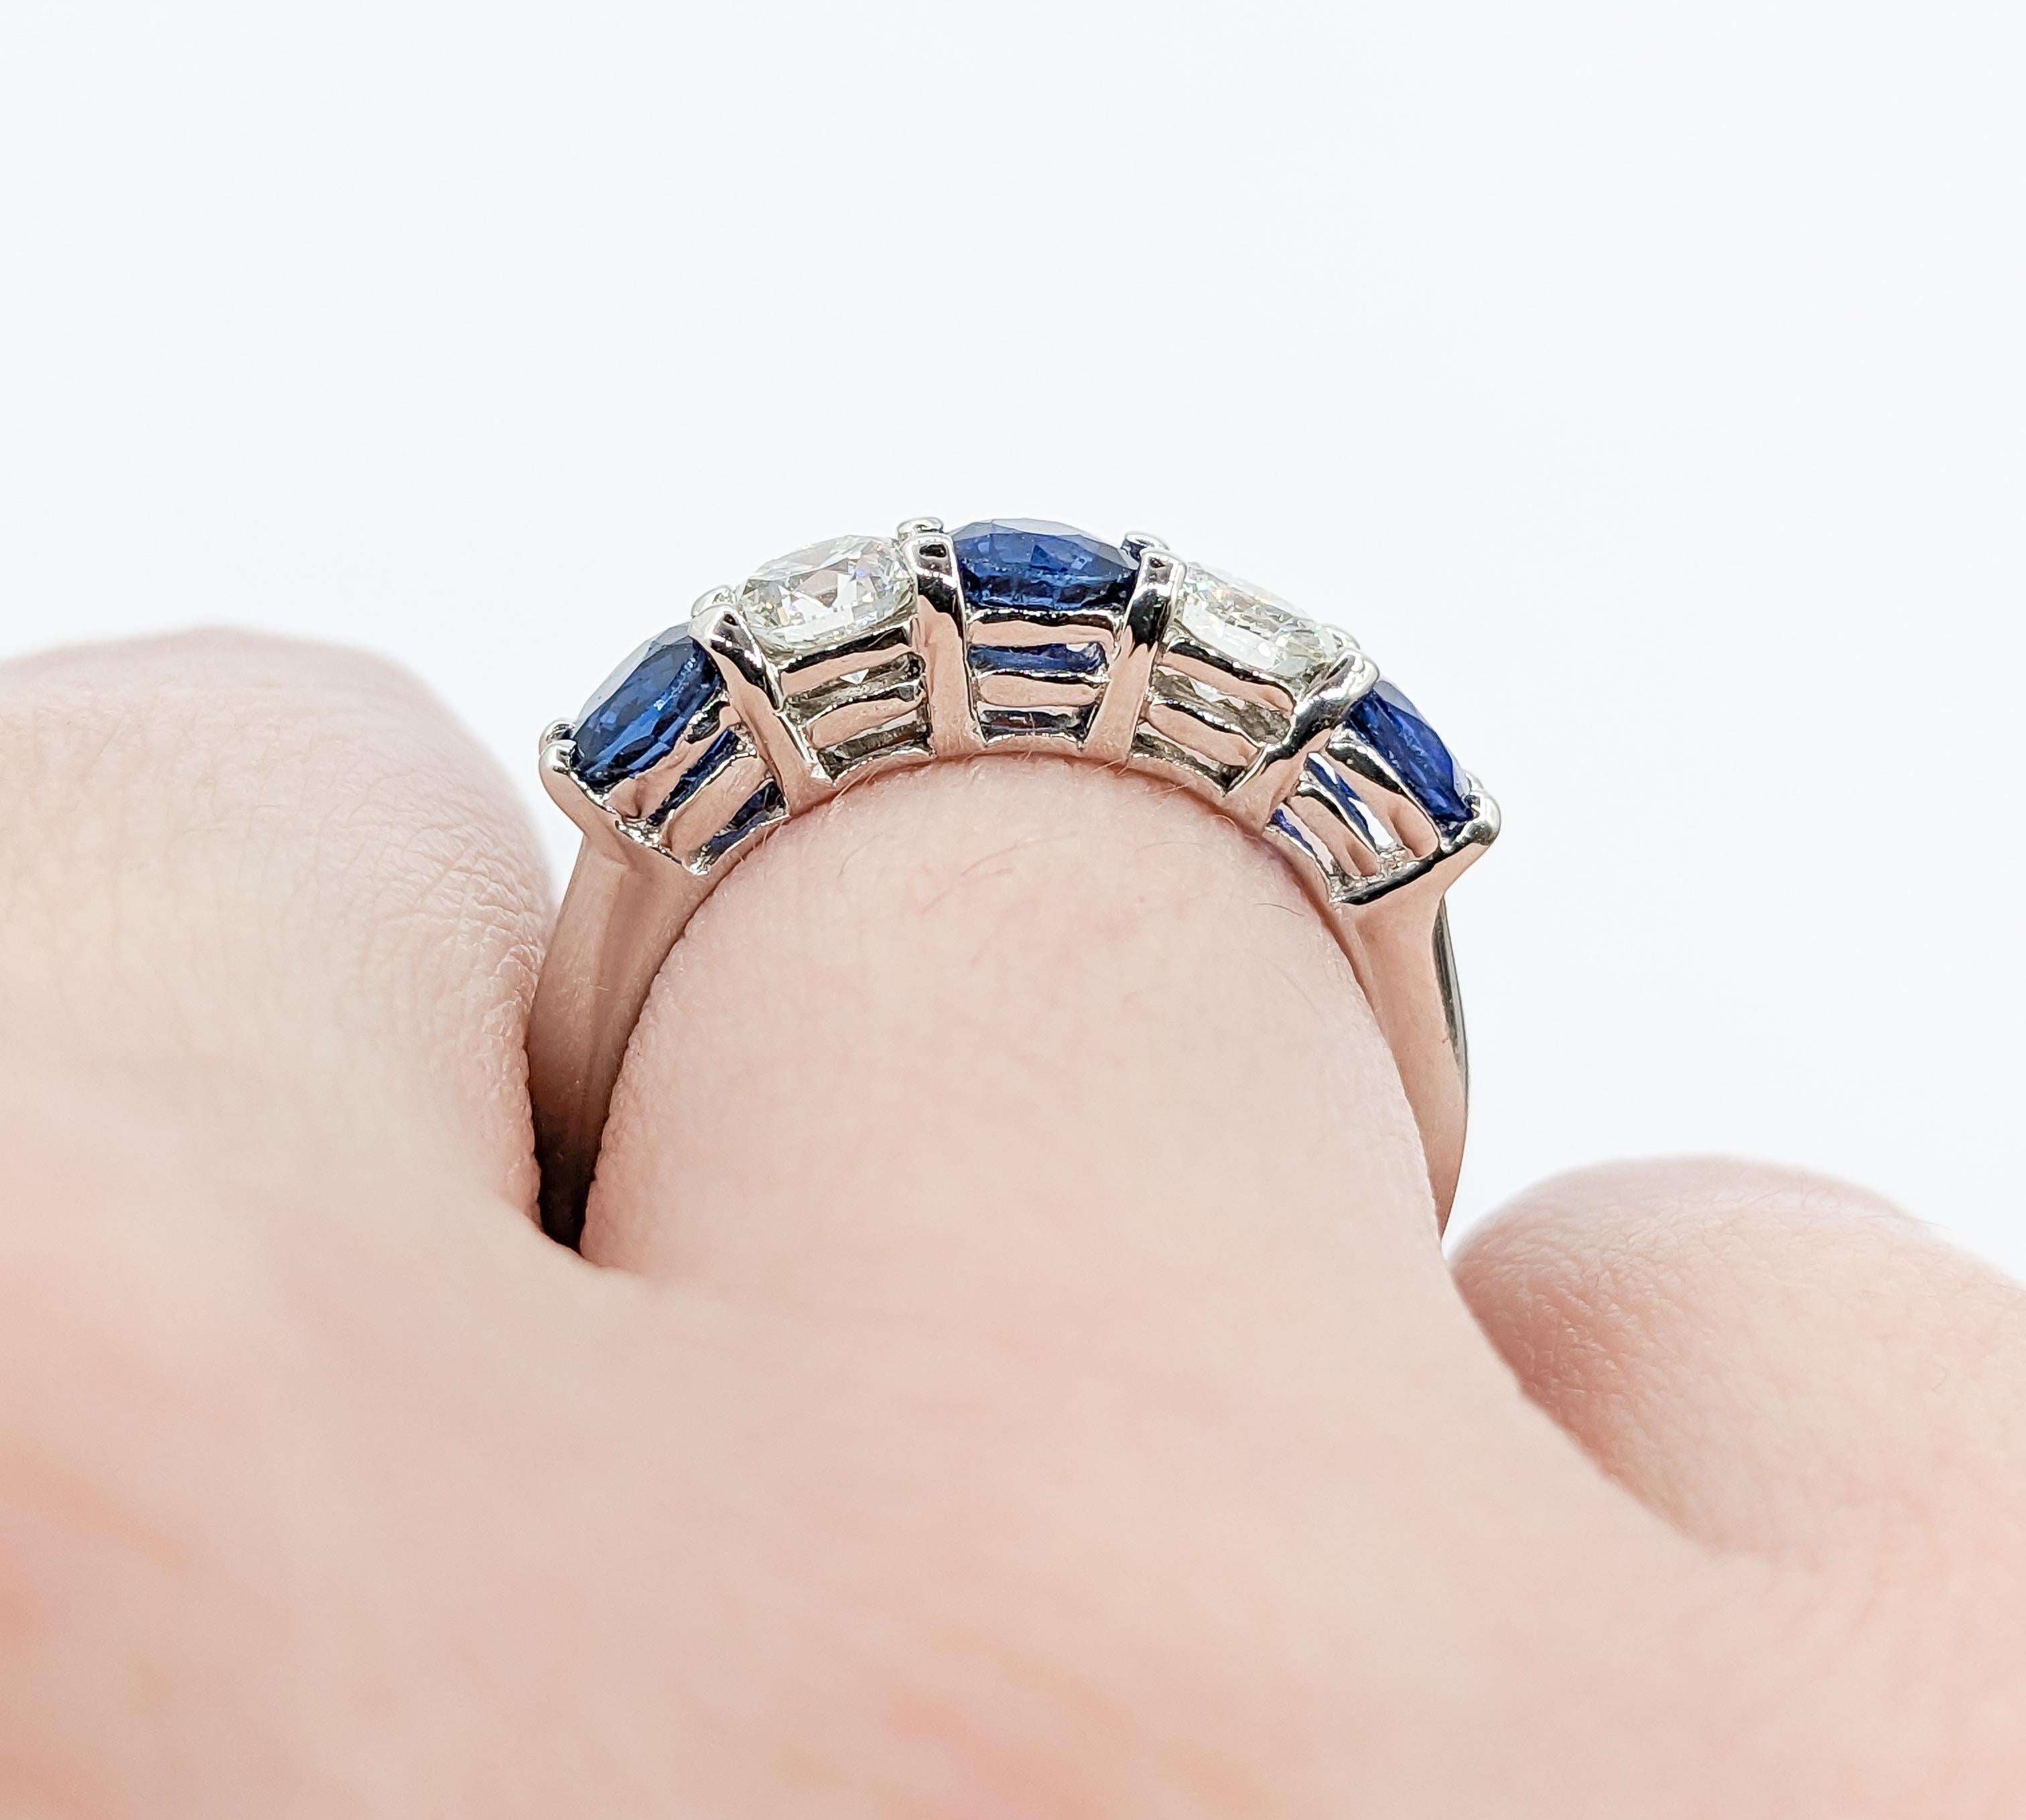 Diamond & Blue Sapphire Ring in Platinum

This beautiful Diamond and Sapphire Ring is expertly crafted in platinum and showcases a total of 0.66 carats of round diamonds, which dazzle with VS2 clarity and near-colorless color. Complementing the